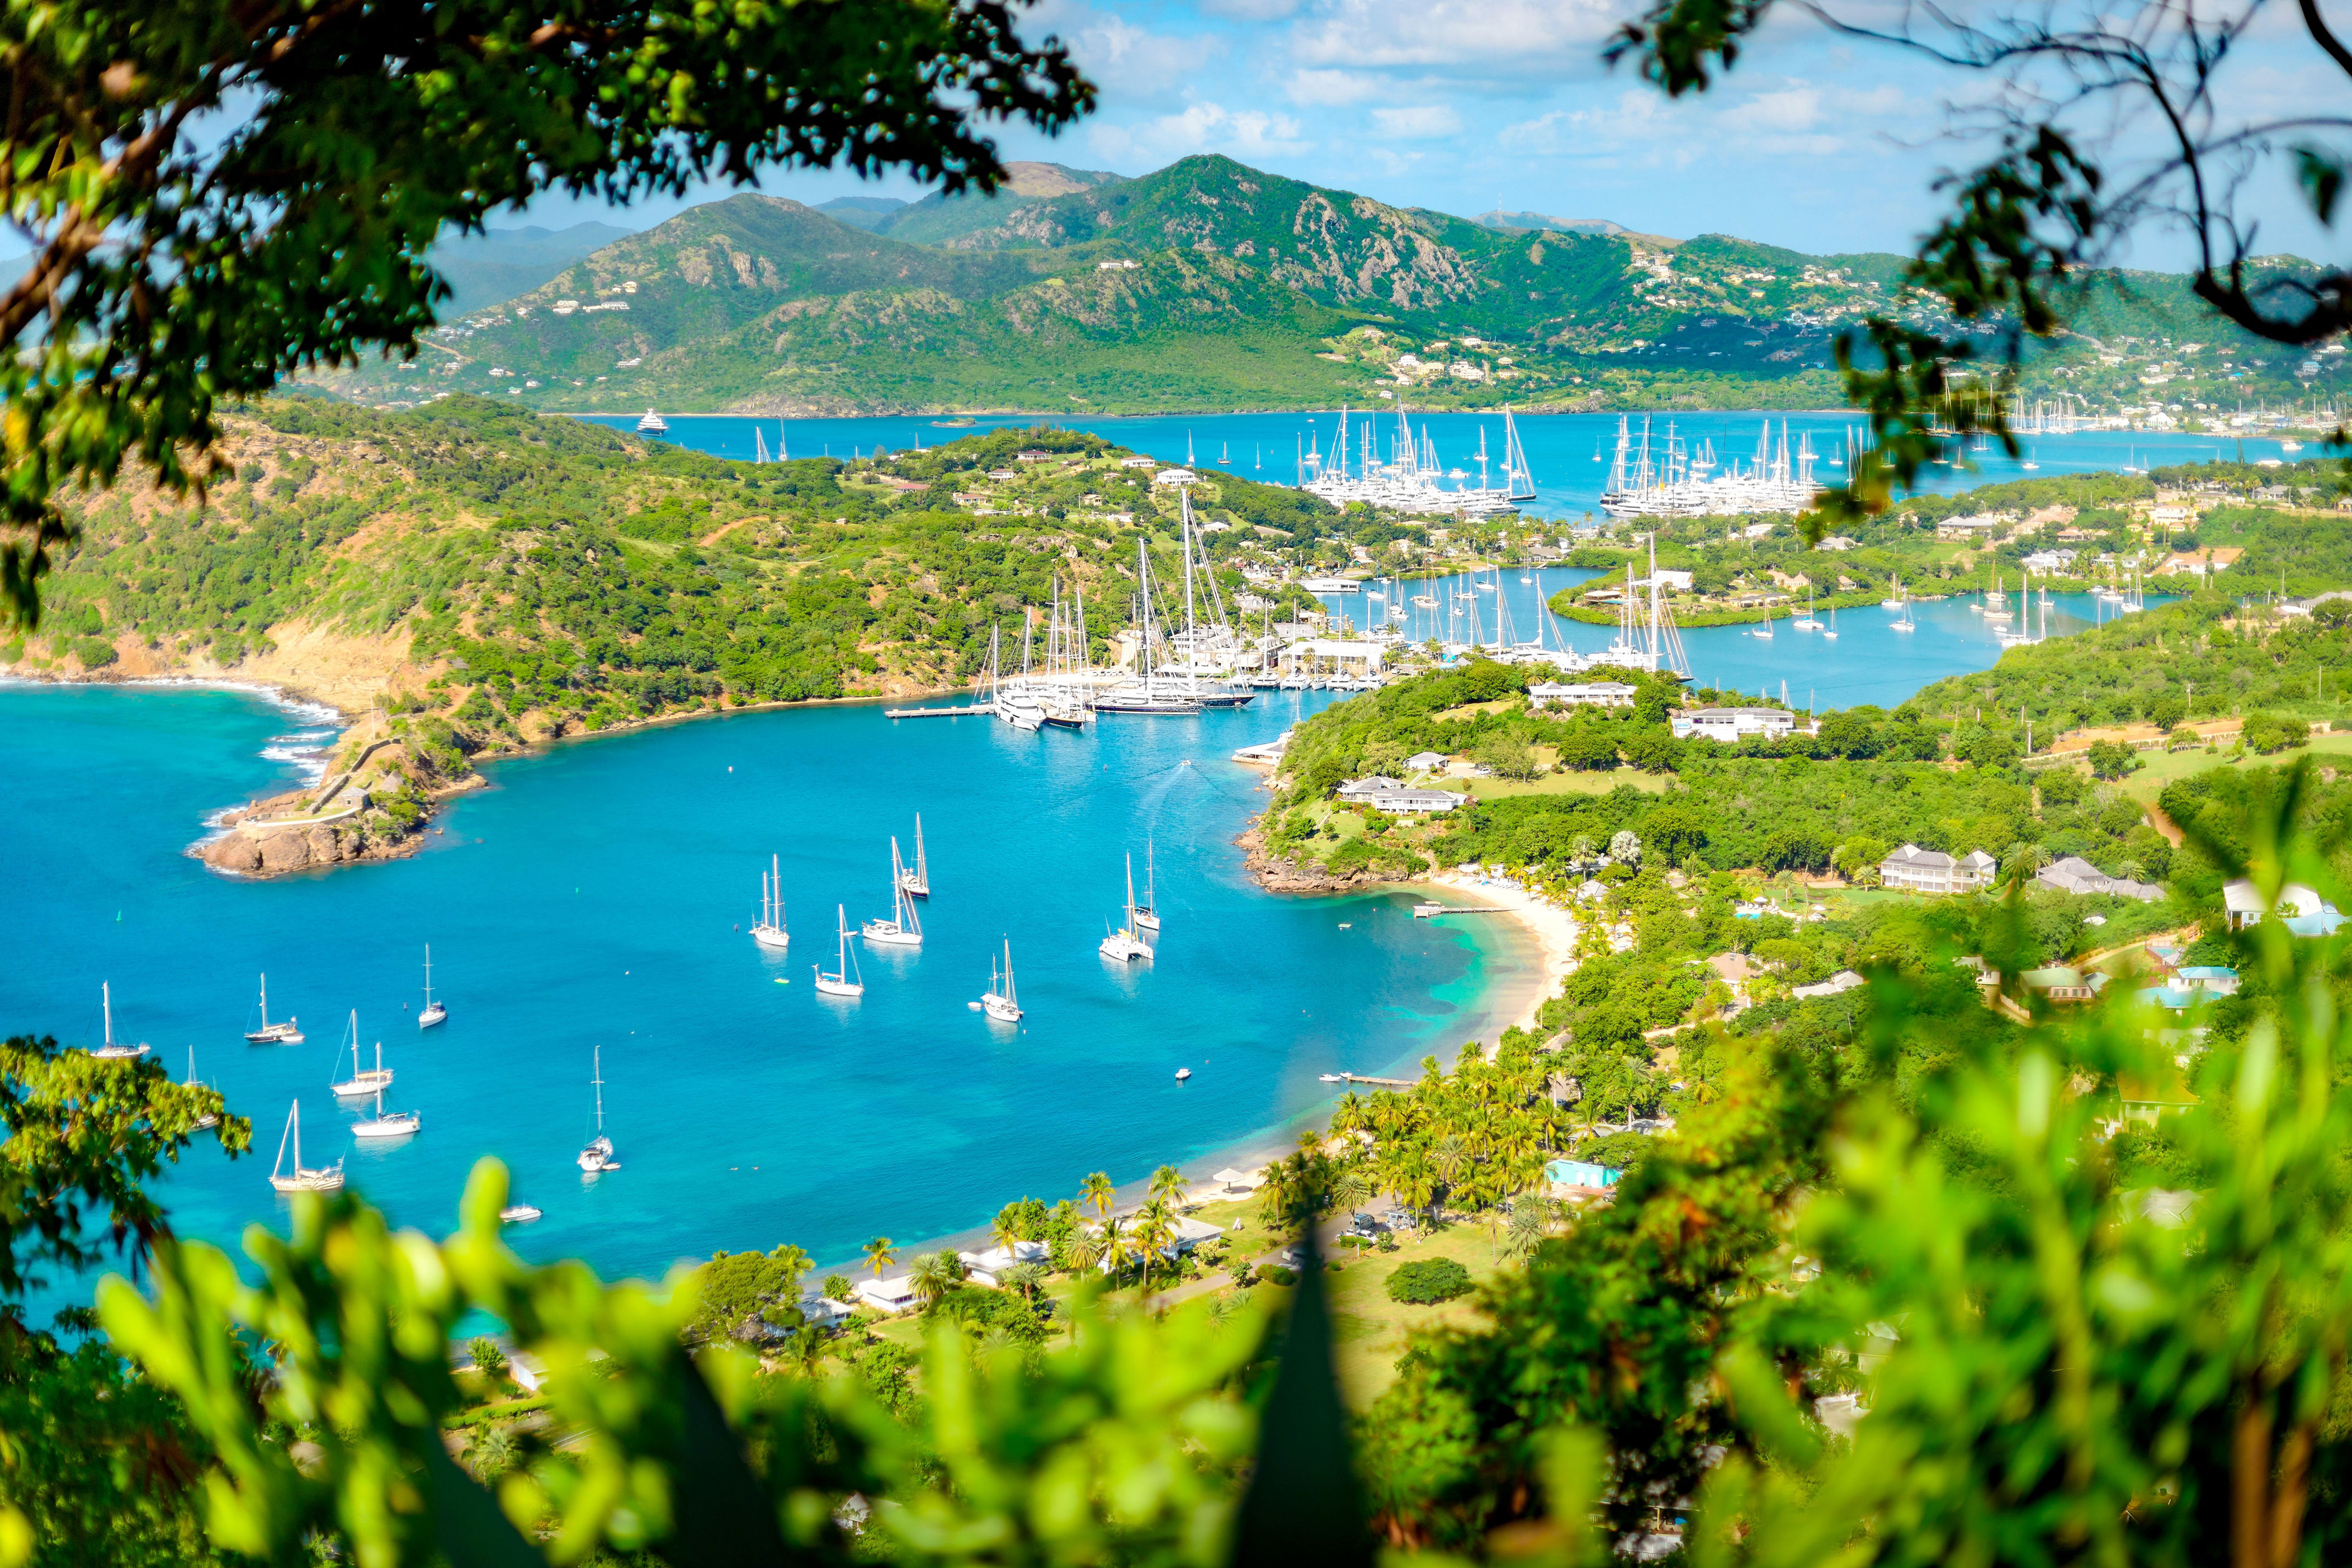 <p>Antigua mixes tropical beauty with British history—just look at the candy-colored colonial buildings and much-touted 365 beaches to choose from. The island is also a must-visit for any <a href="https://www.cntraveler.com/gallery/caribbean-island-finder-sailing?mbid=synd_msn_rss&utm_source=msn&utm_medium=syndication">sailing fans</a> out there. During the first two weeks of April, hundreds of yachts from around the world converge for the island’s annual Classic Yacht Regatta and Sailing Week. On race days, people gather atop Shirley Heights to get the best views of the boat-filled English Harbour.</p> <p>Even if you visit on non-yachting holidays, Shirley Heights should be on your itinerary: Looking out over the harbor’s curved coastline is a truly unforgettable experience, with Sunday BBQs to boot.</p><p>Sign up to receive the latest news, expert tips, and inspiration on all things travel</p><a href="https://www.cntraveler.com/newsletter/the-daily?sourceCode=msnsend">Inspire Me</a>